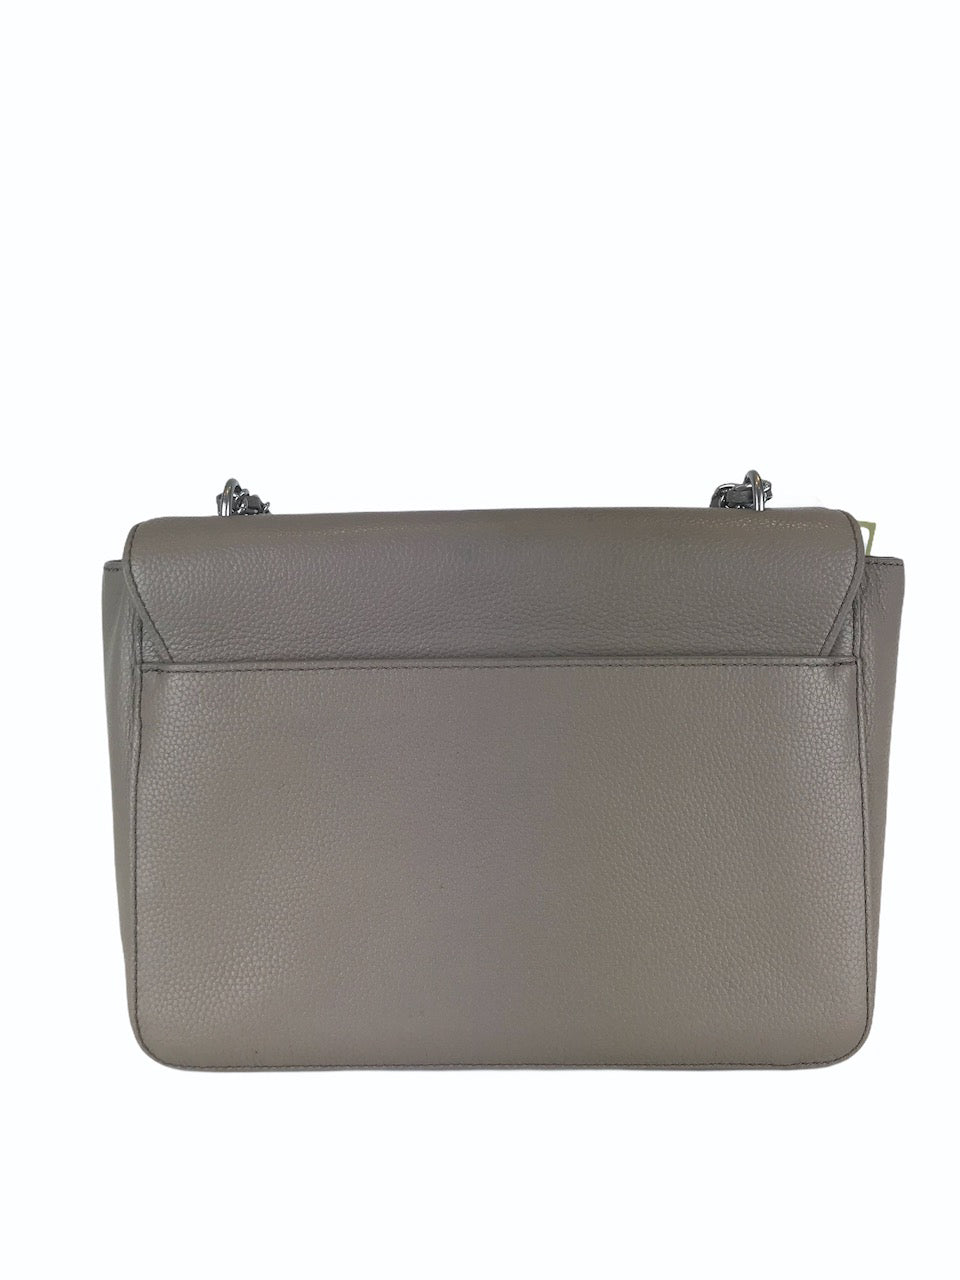 Tory Burch Taupe Grey Leather Shoulder Bag - As Seen On Instagram 09/09/2020 - Siopaella Designer Exchange